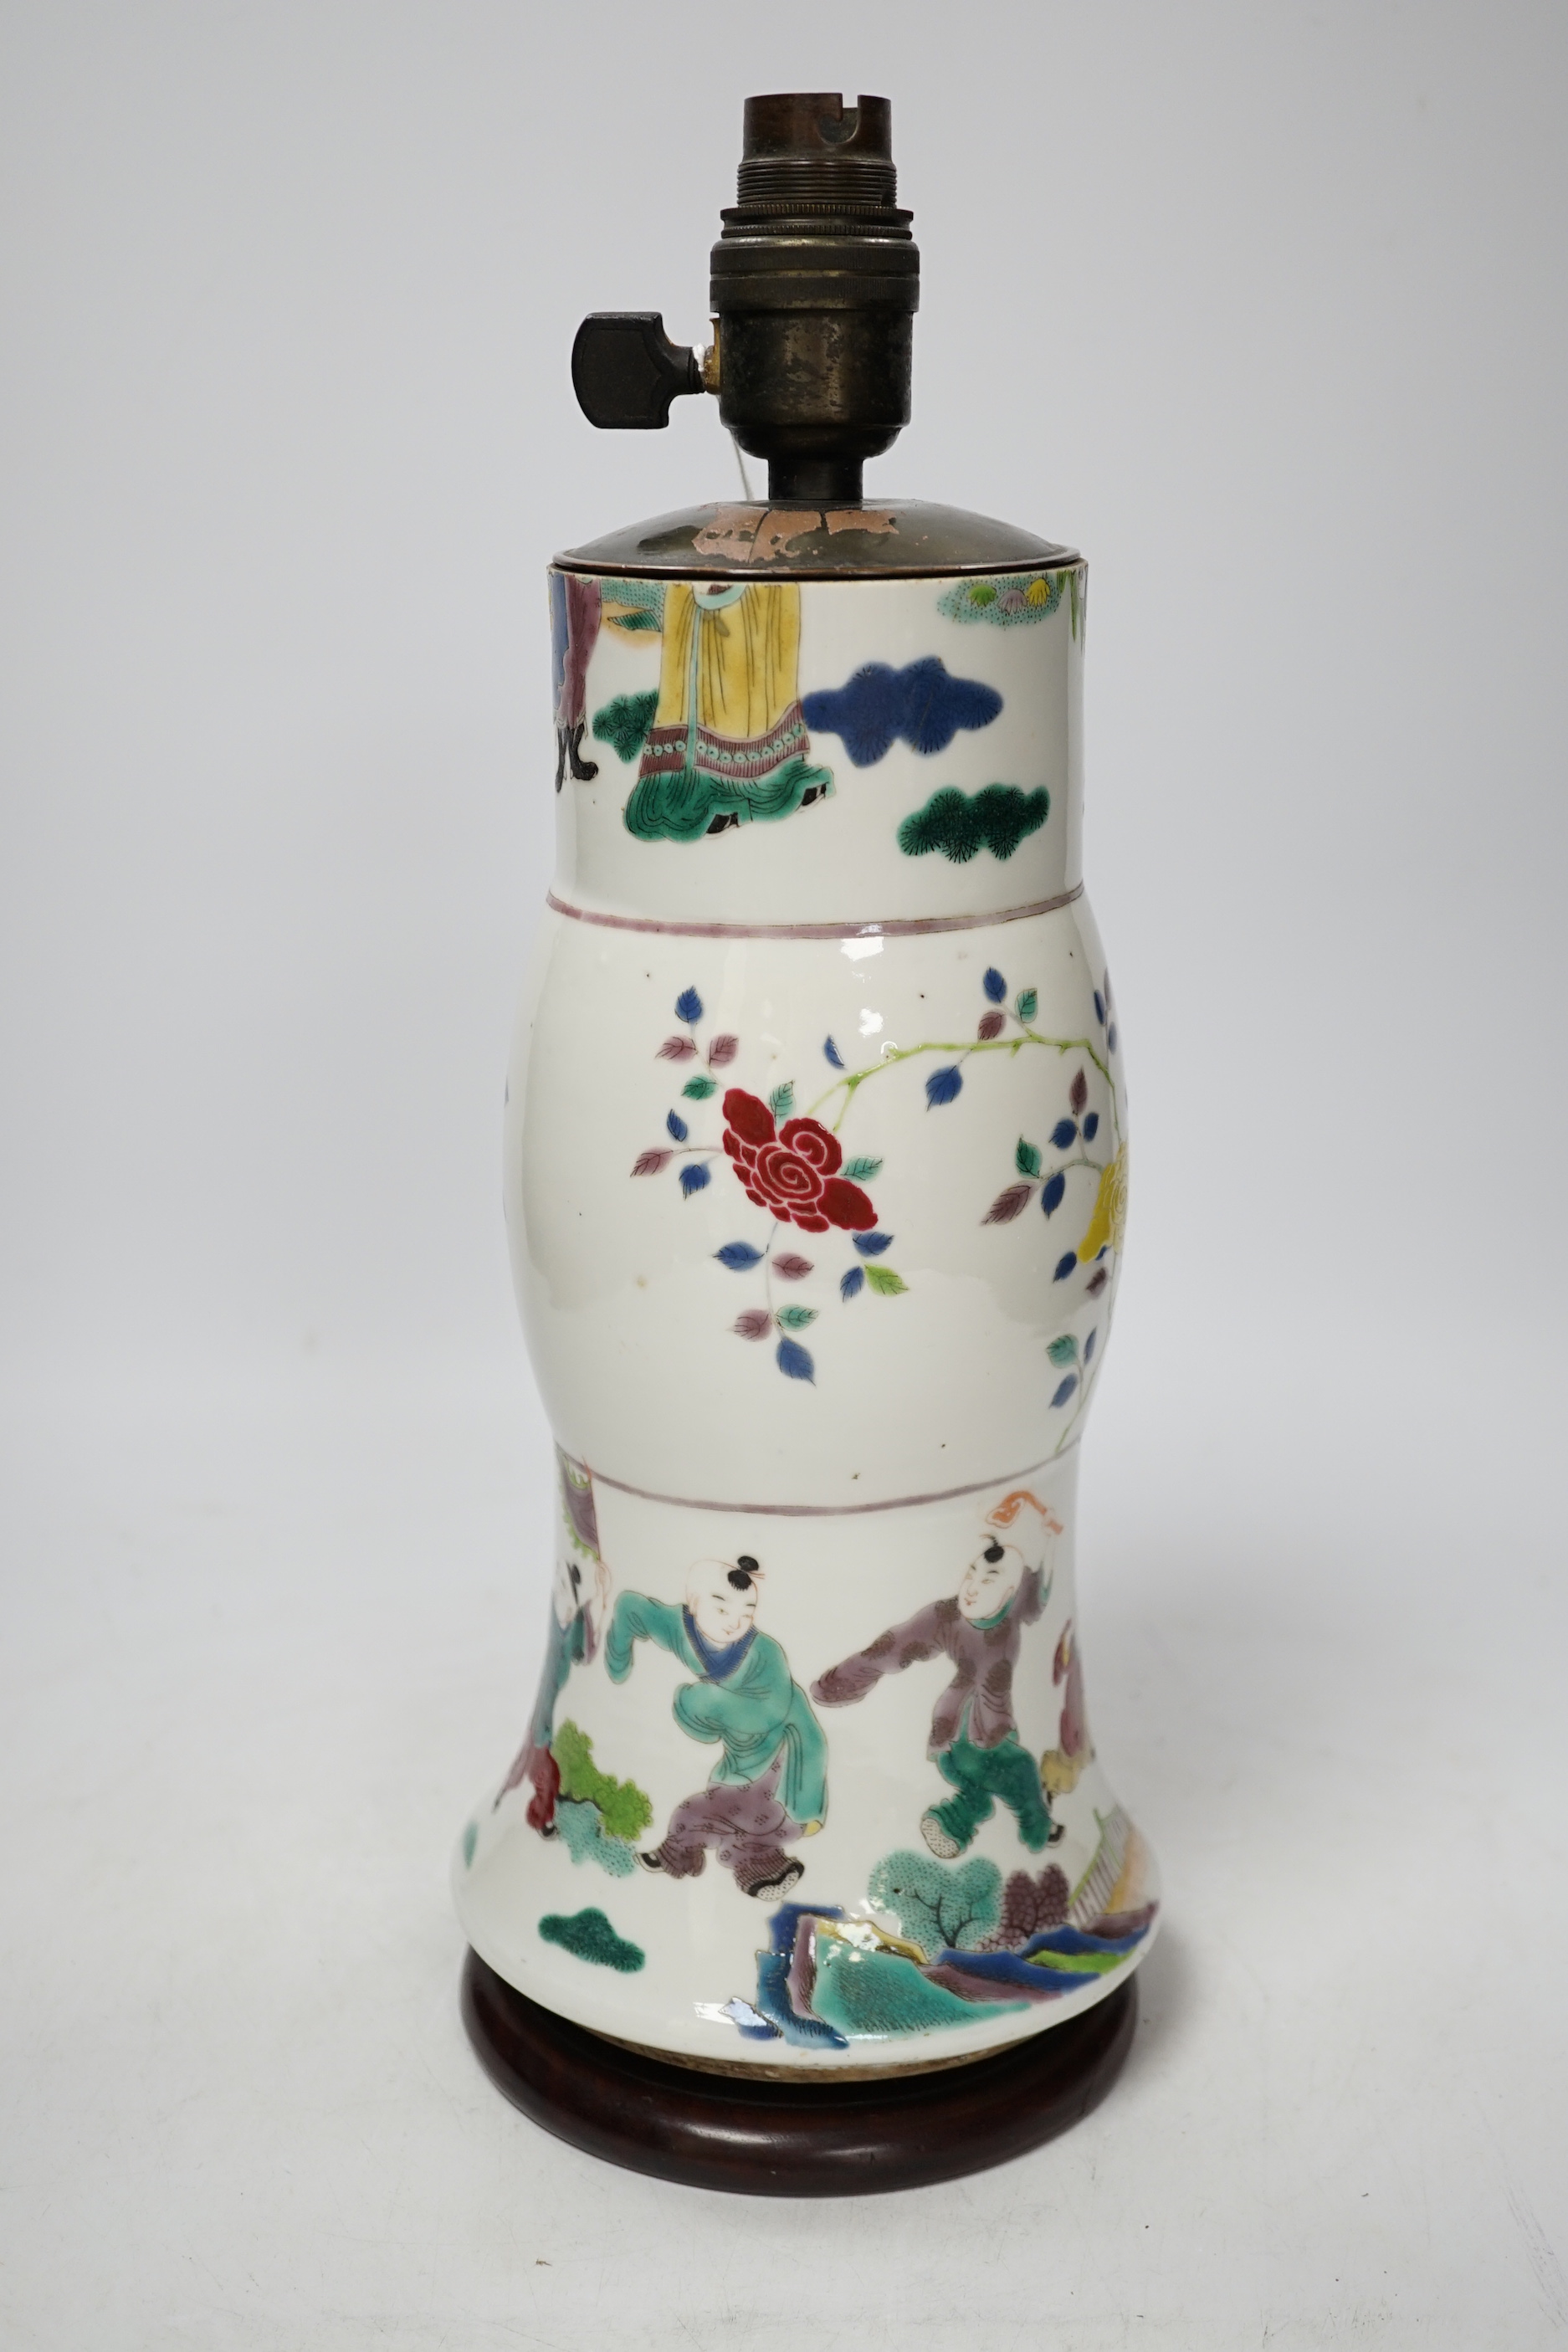 An early 19th century Chinese famille rose gu vase, converted to a lamp, reduced, apocryphal Kangxi mark, overall 35cm high